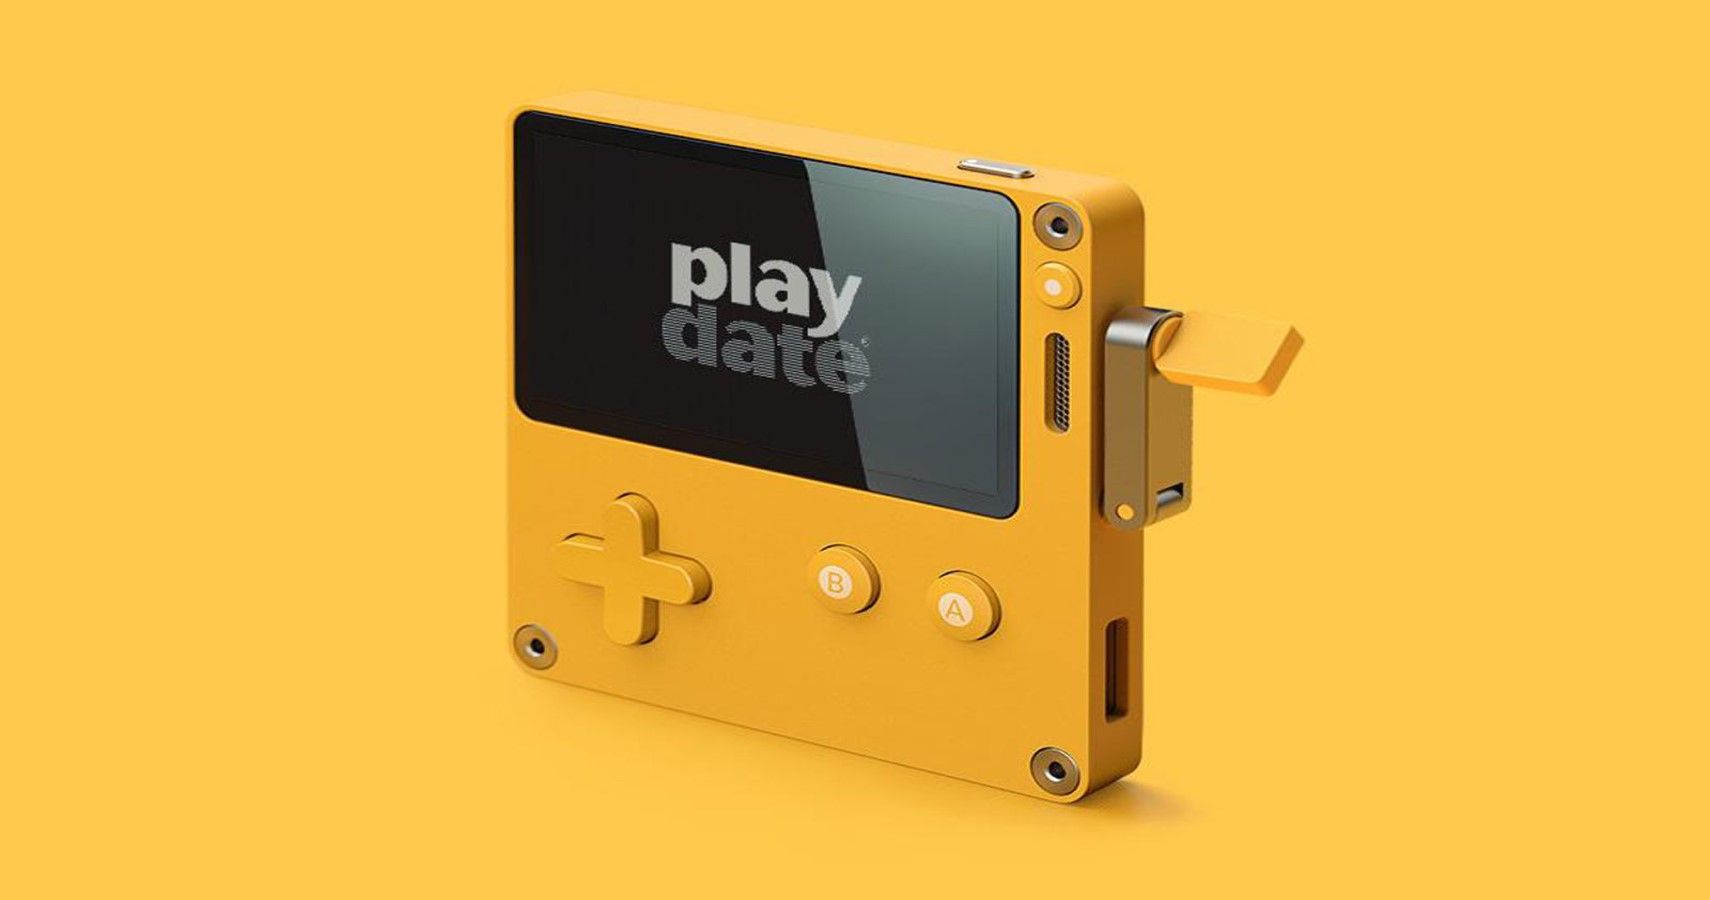 Firewatch And Smartphone App Developer Panic Has Created An Adorable Handheld